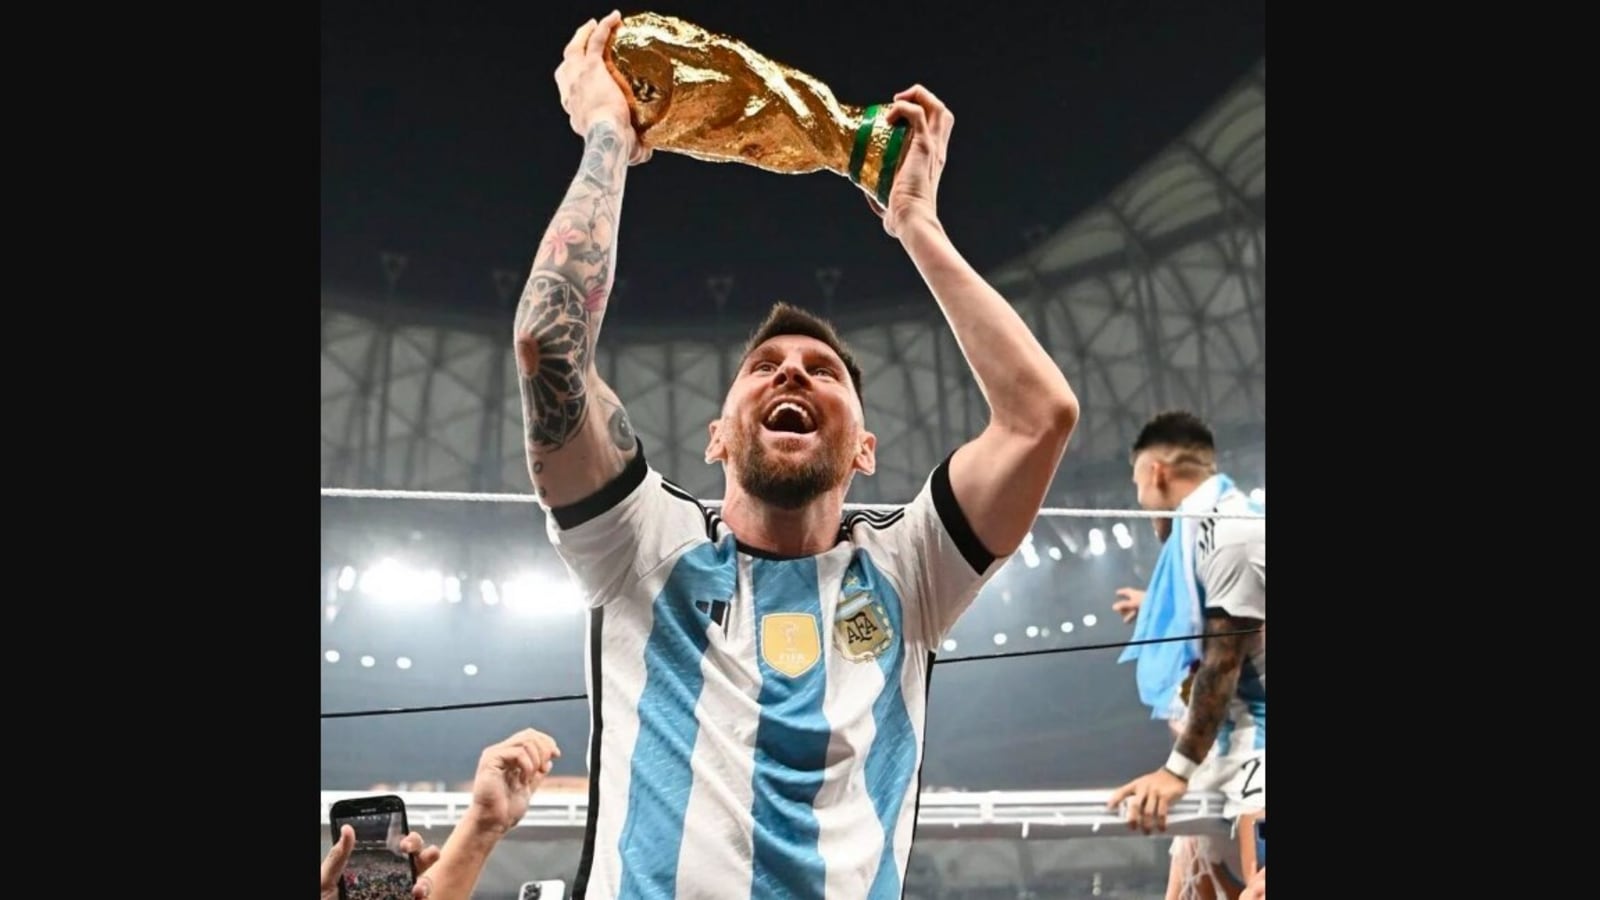 LOOK: Lionel Messi's World Cup photo becomes most liked post in